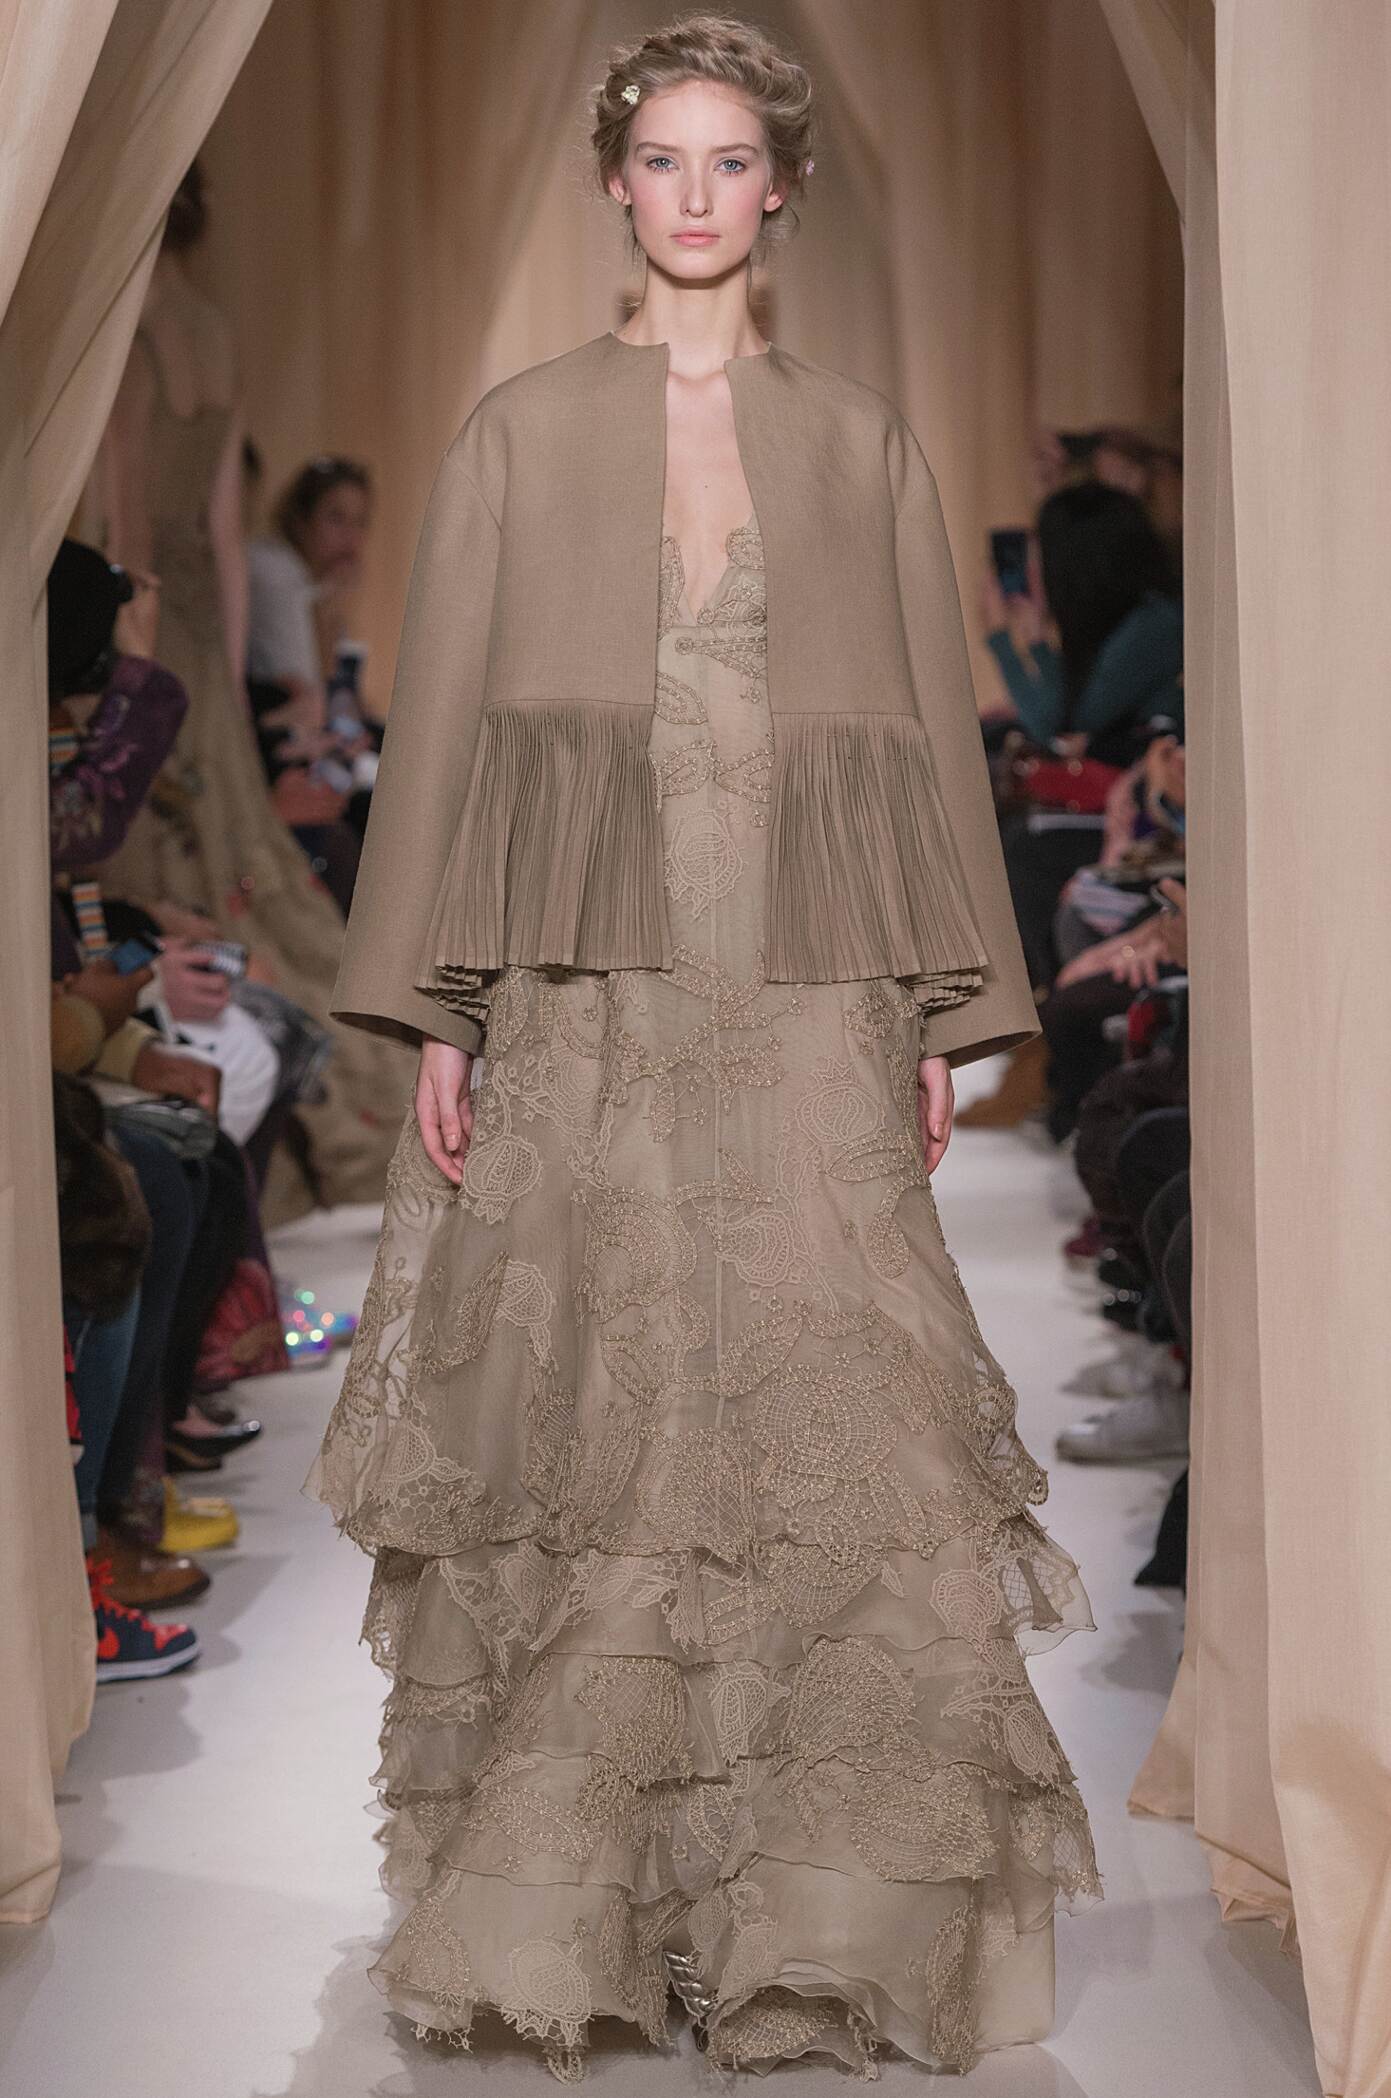 VALENTINO HAUTE COUTURE SPRING SUMMER 2015 WOMEN’S COLLECTION | The